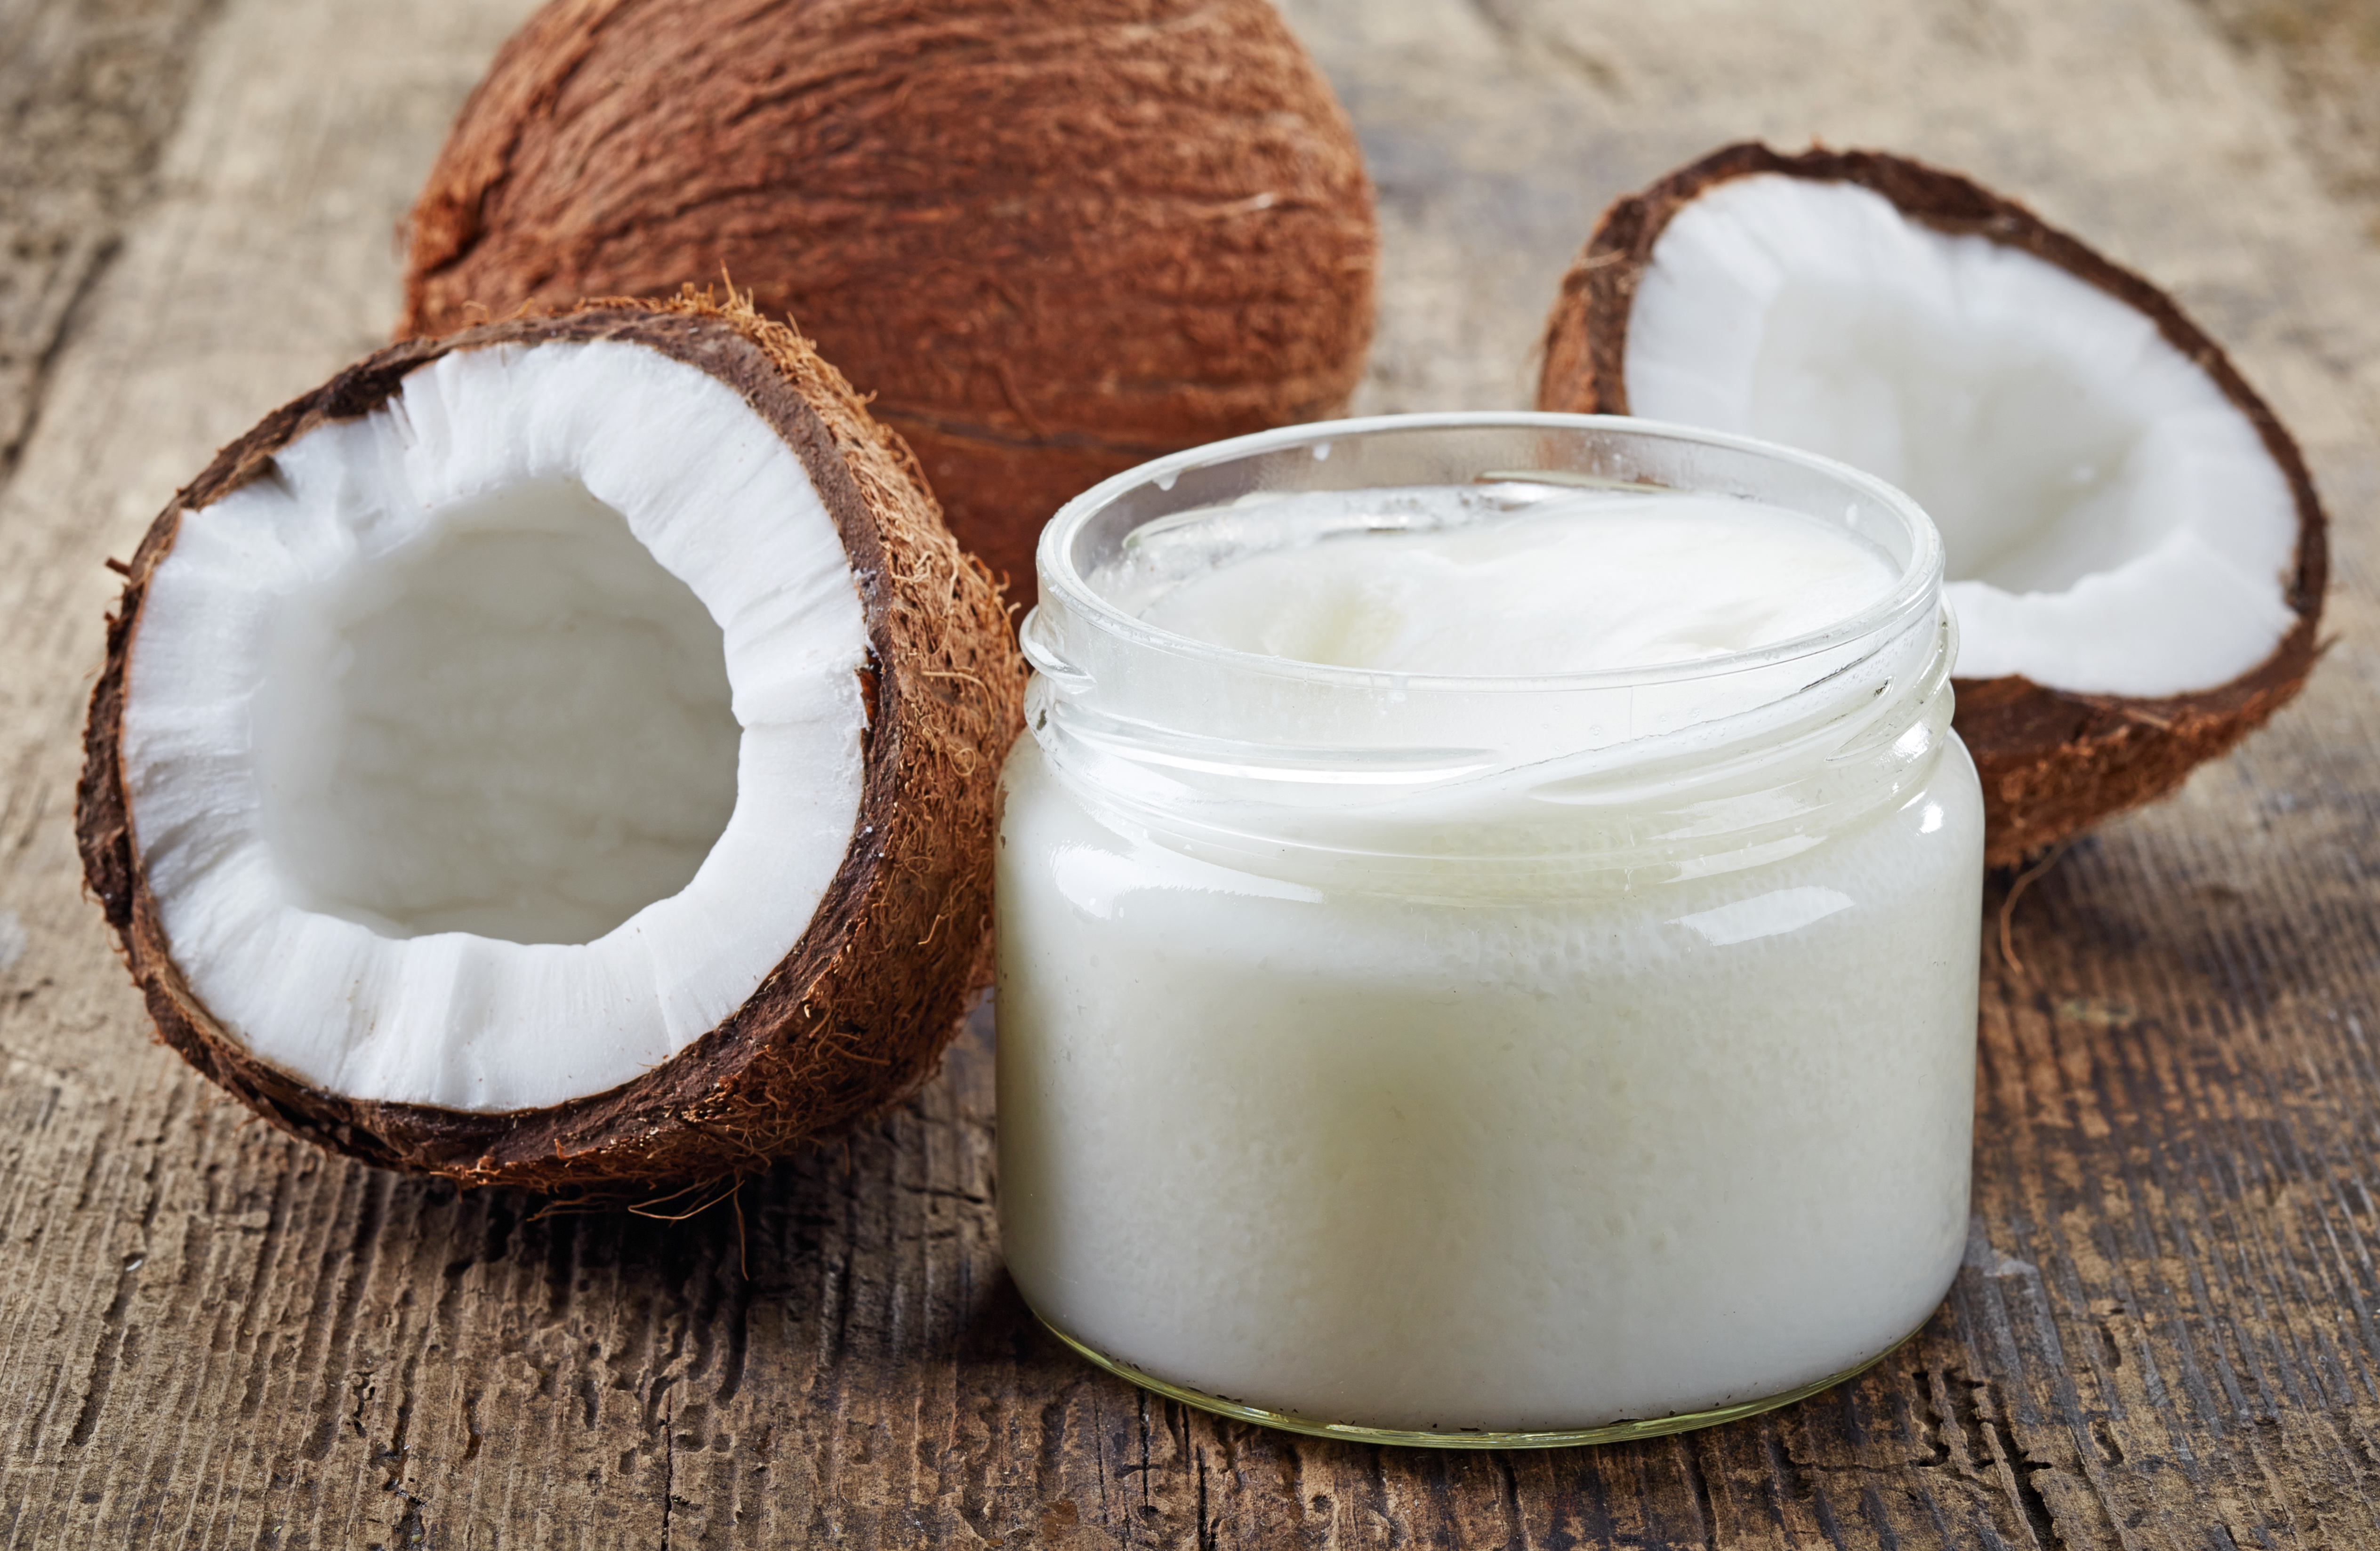 Cosmetic Applications of Coconut Oil: How Does It Benefit the Skin?